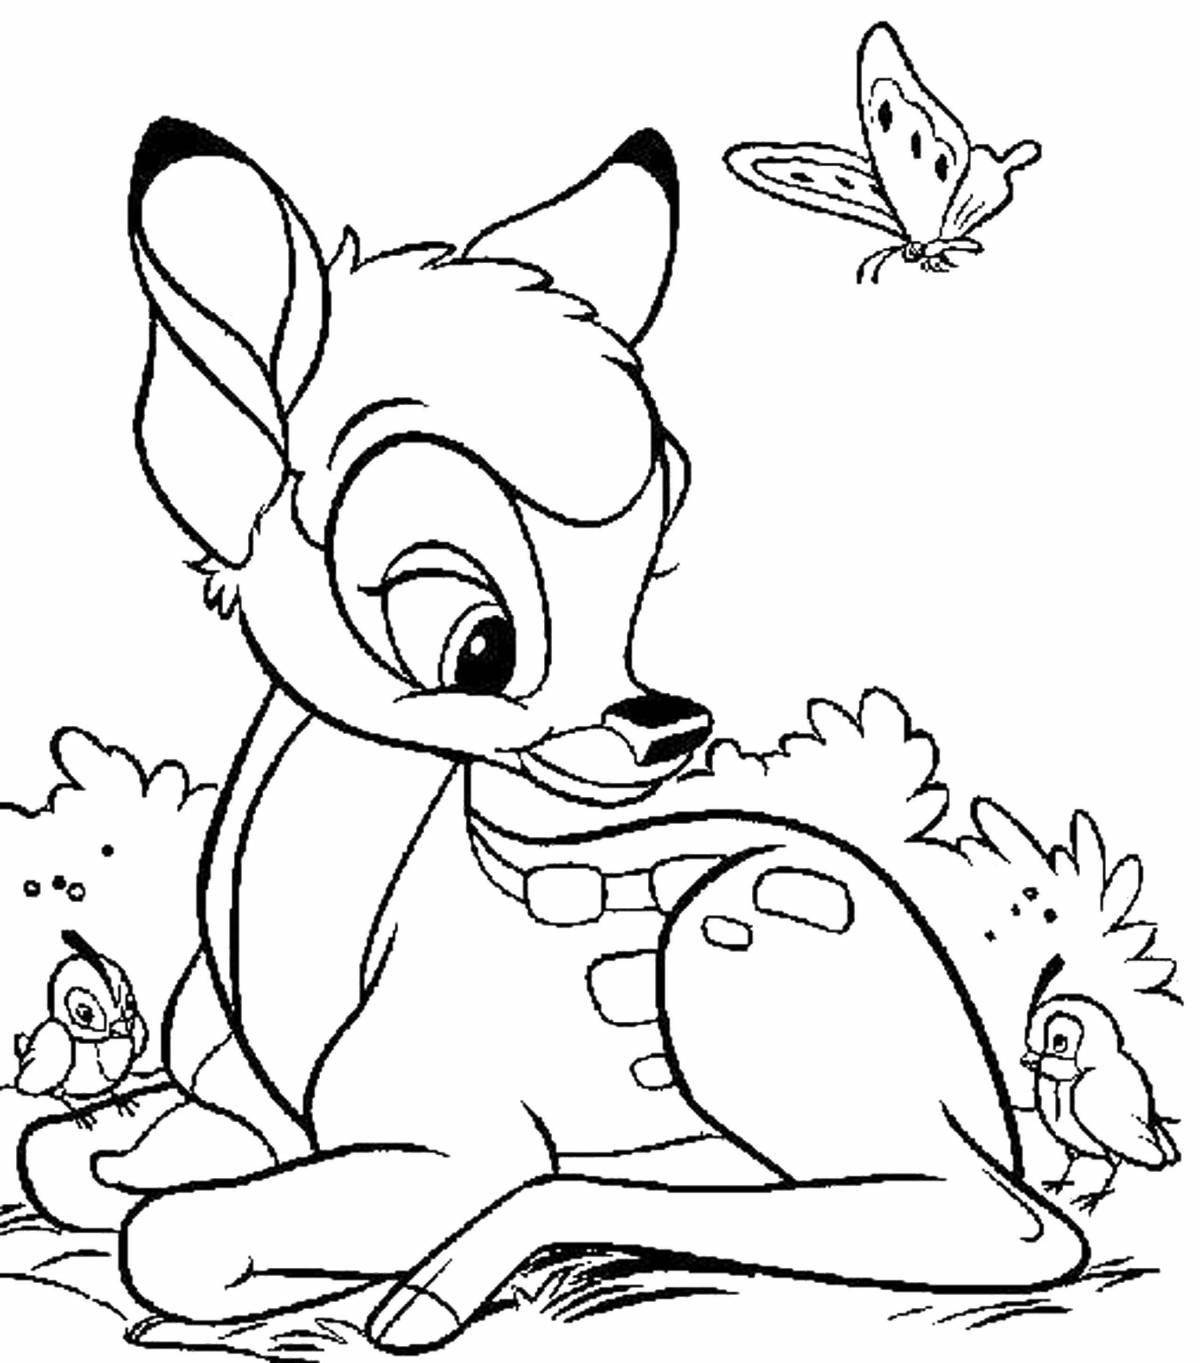 Radiant coloring page disney cartoons